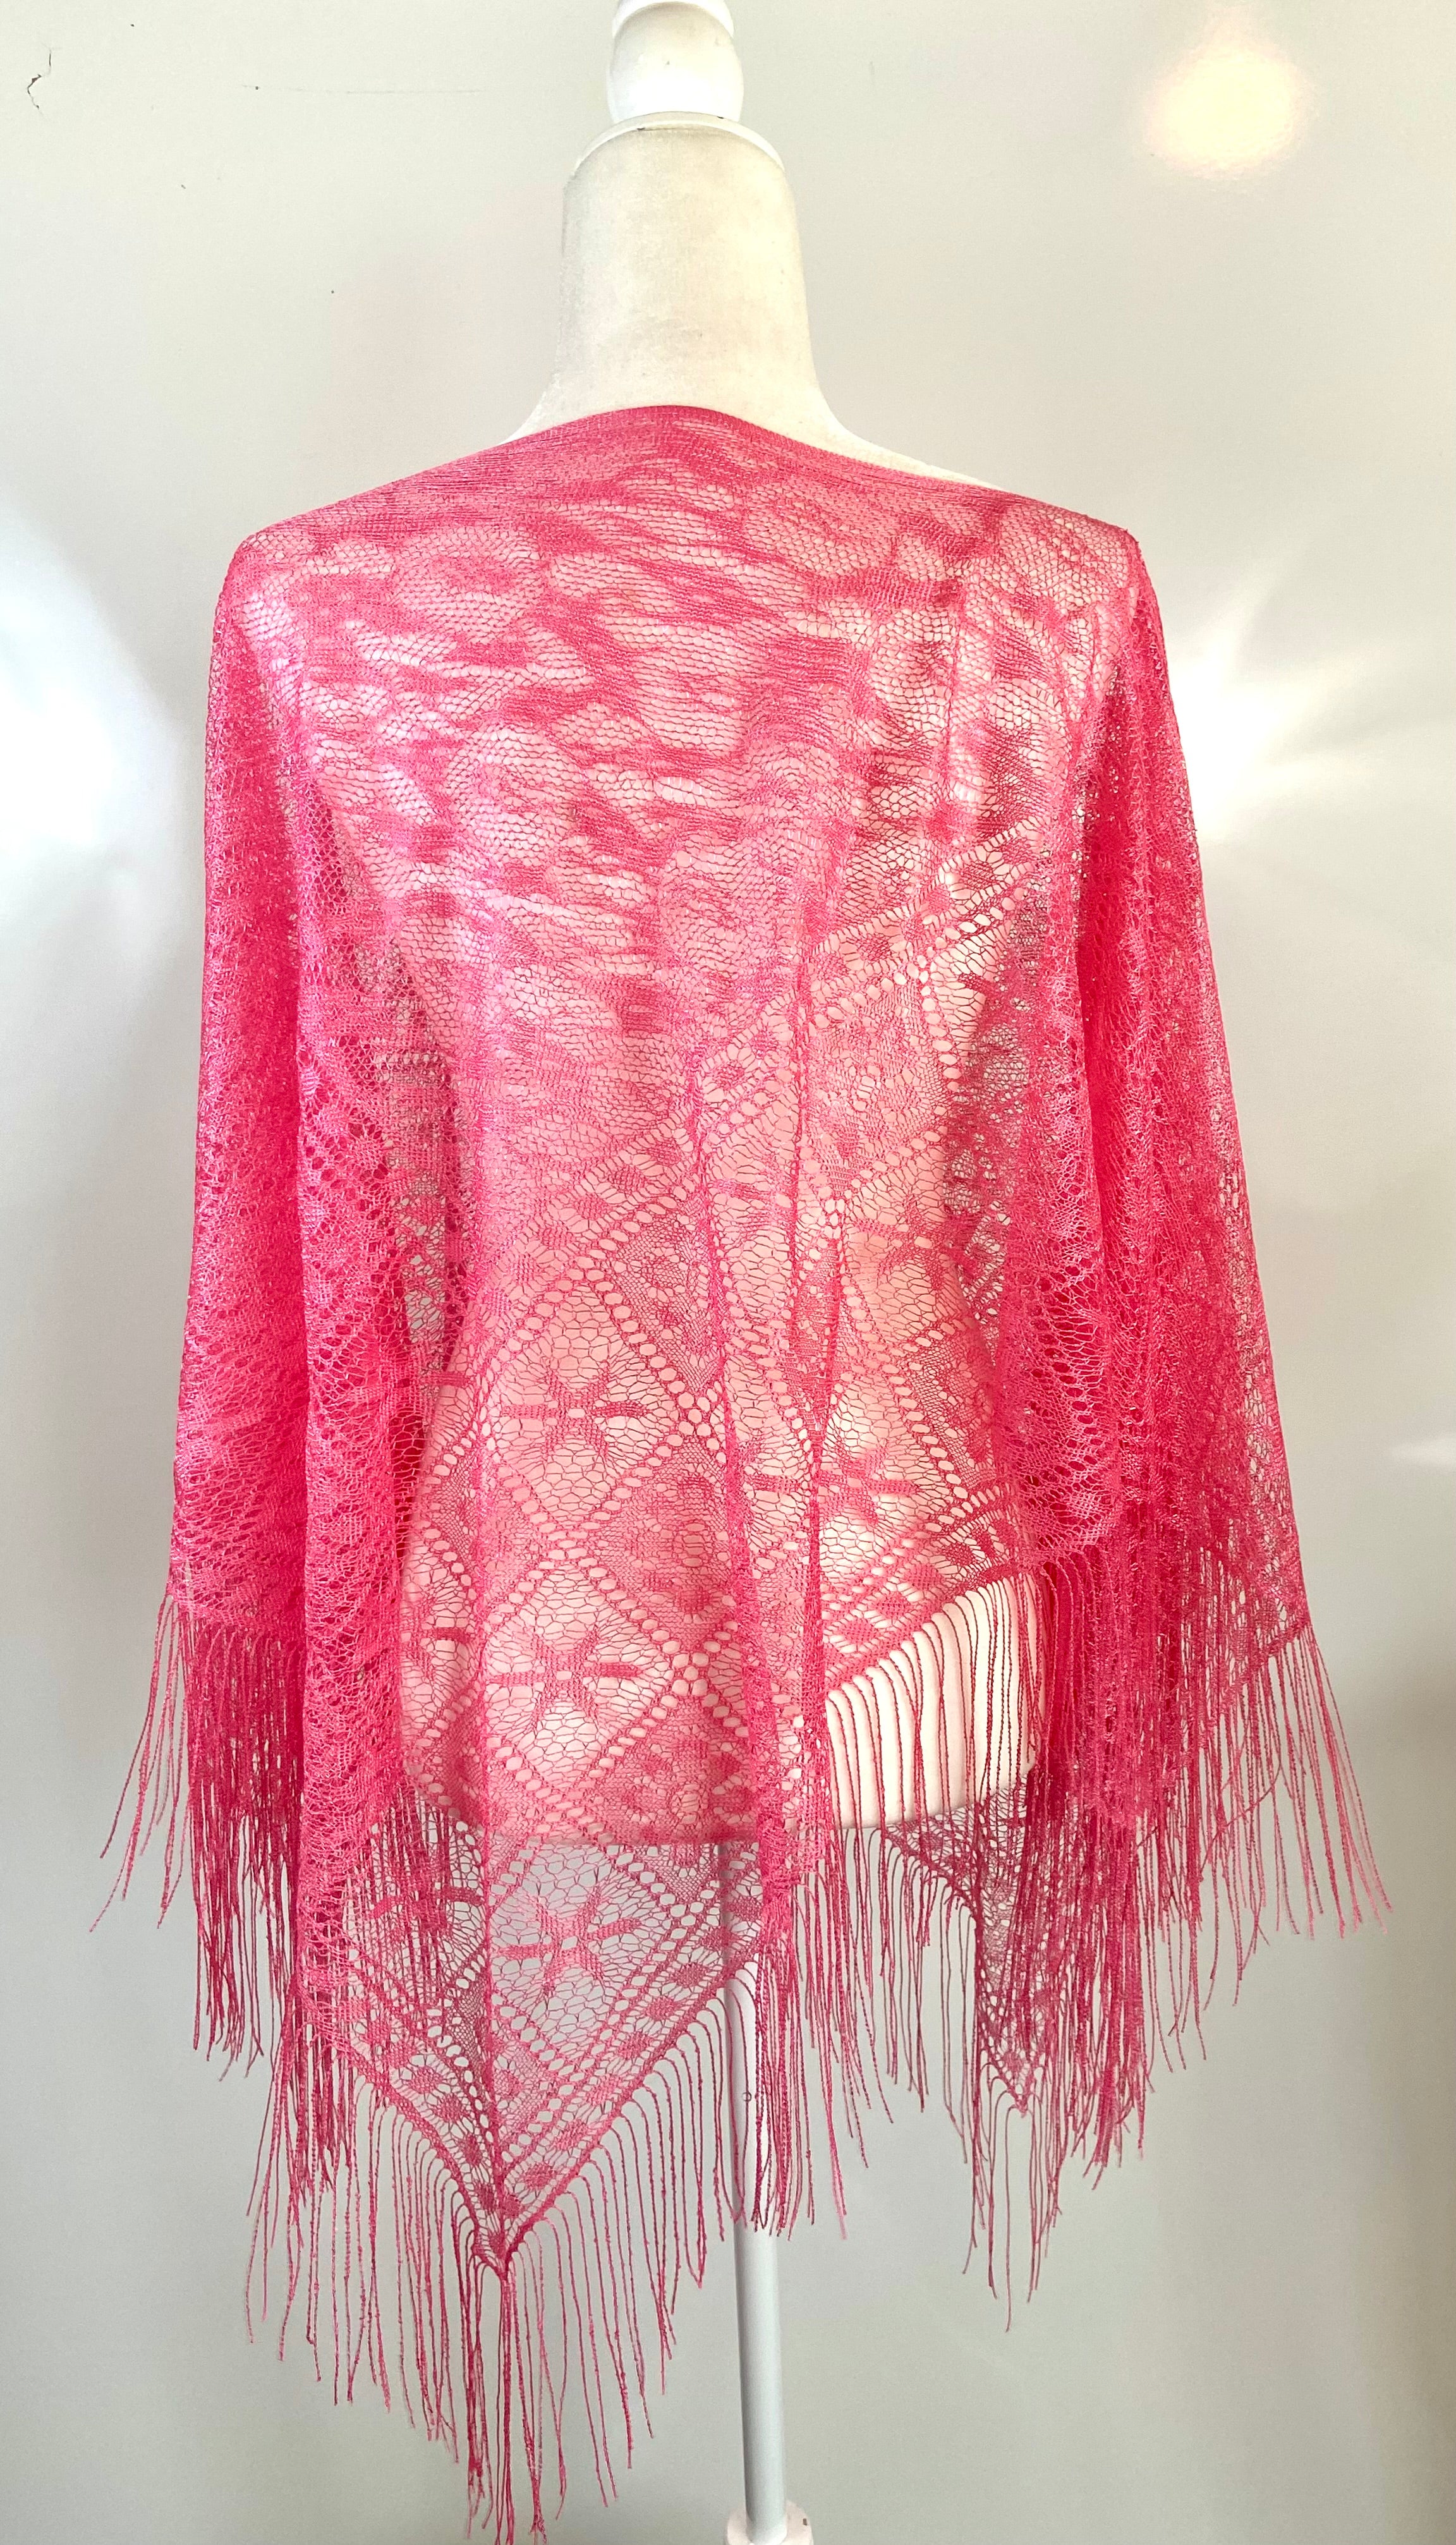 Hot pink poncho with flower accessories